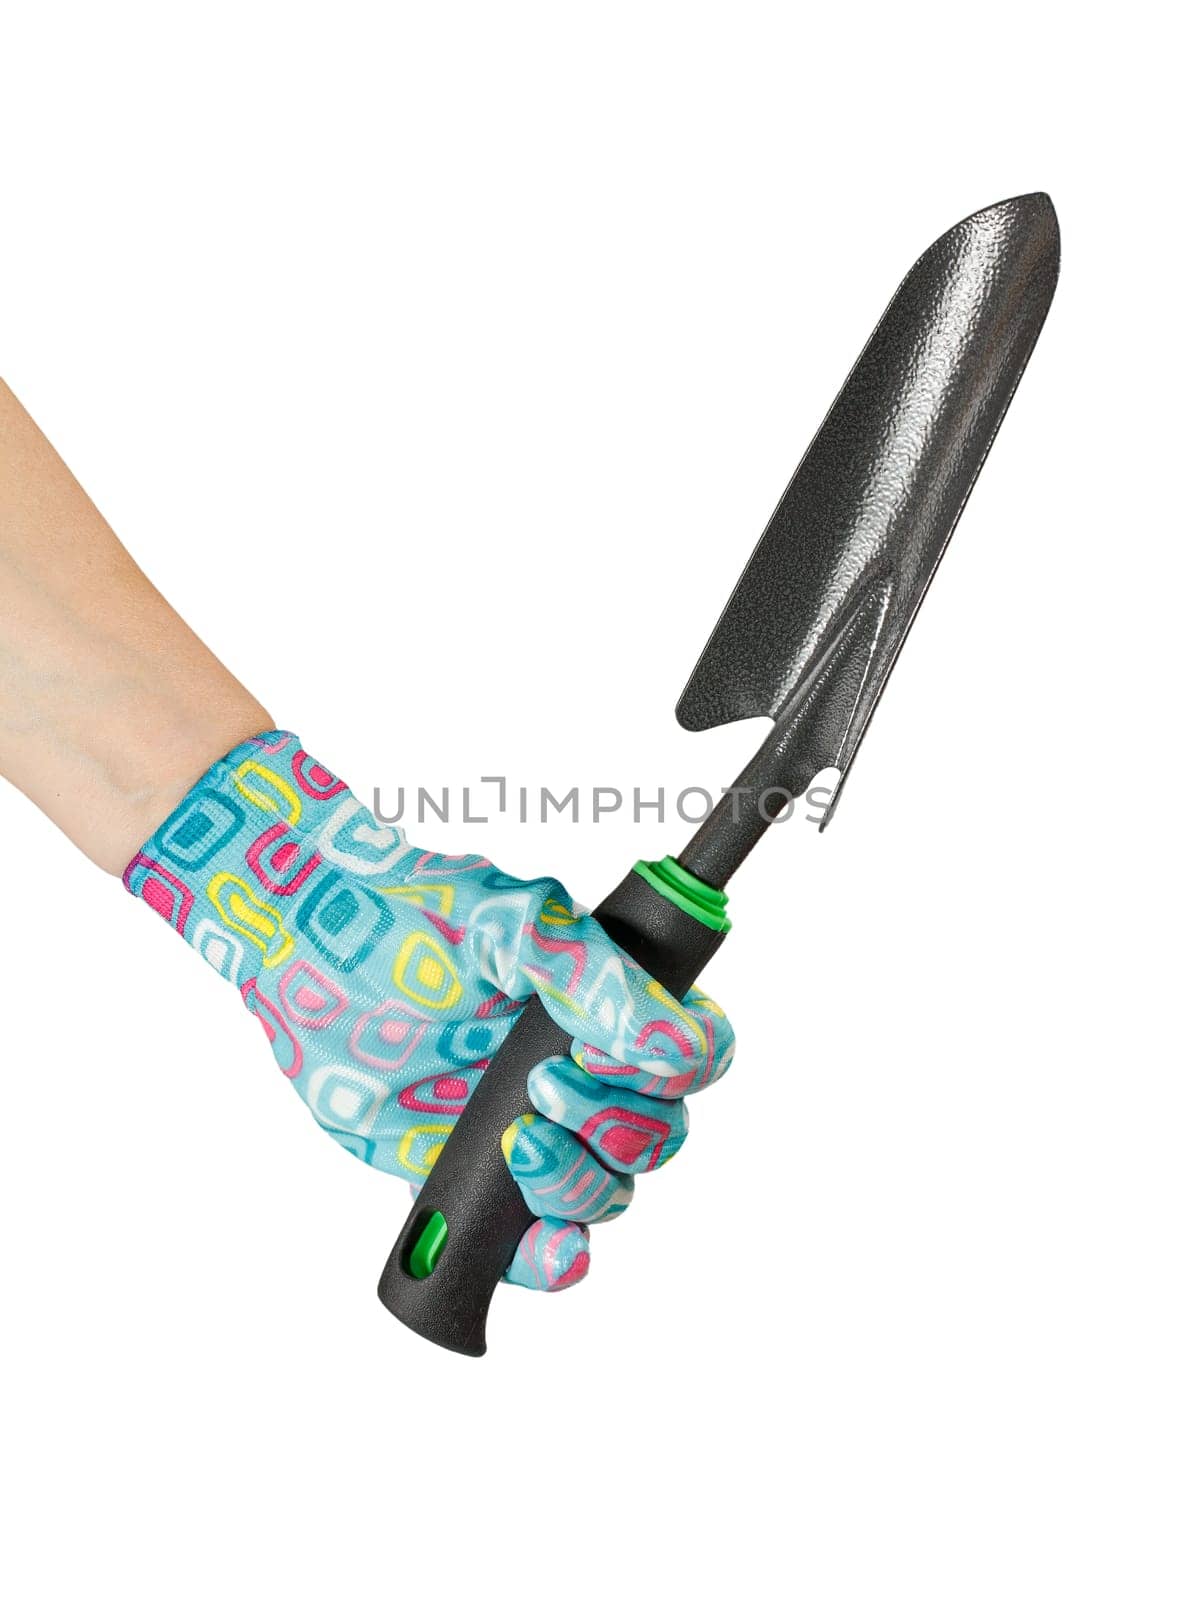 Small garden trowel in woman's hand dressed in a rubber glove on the white isolated background.